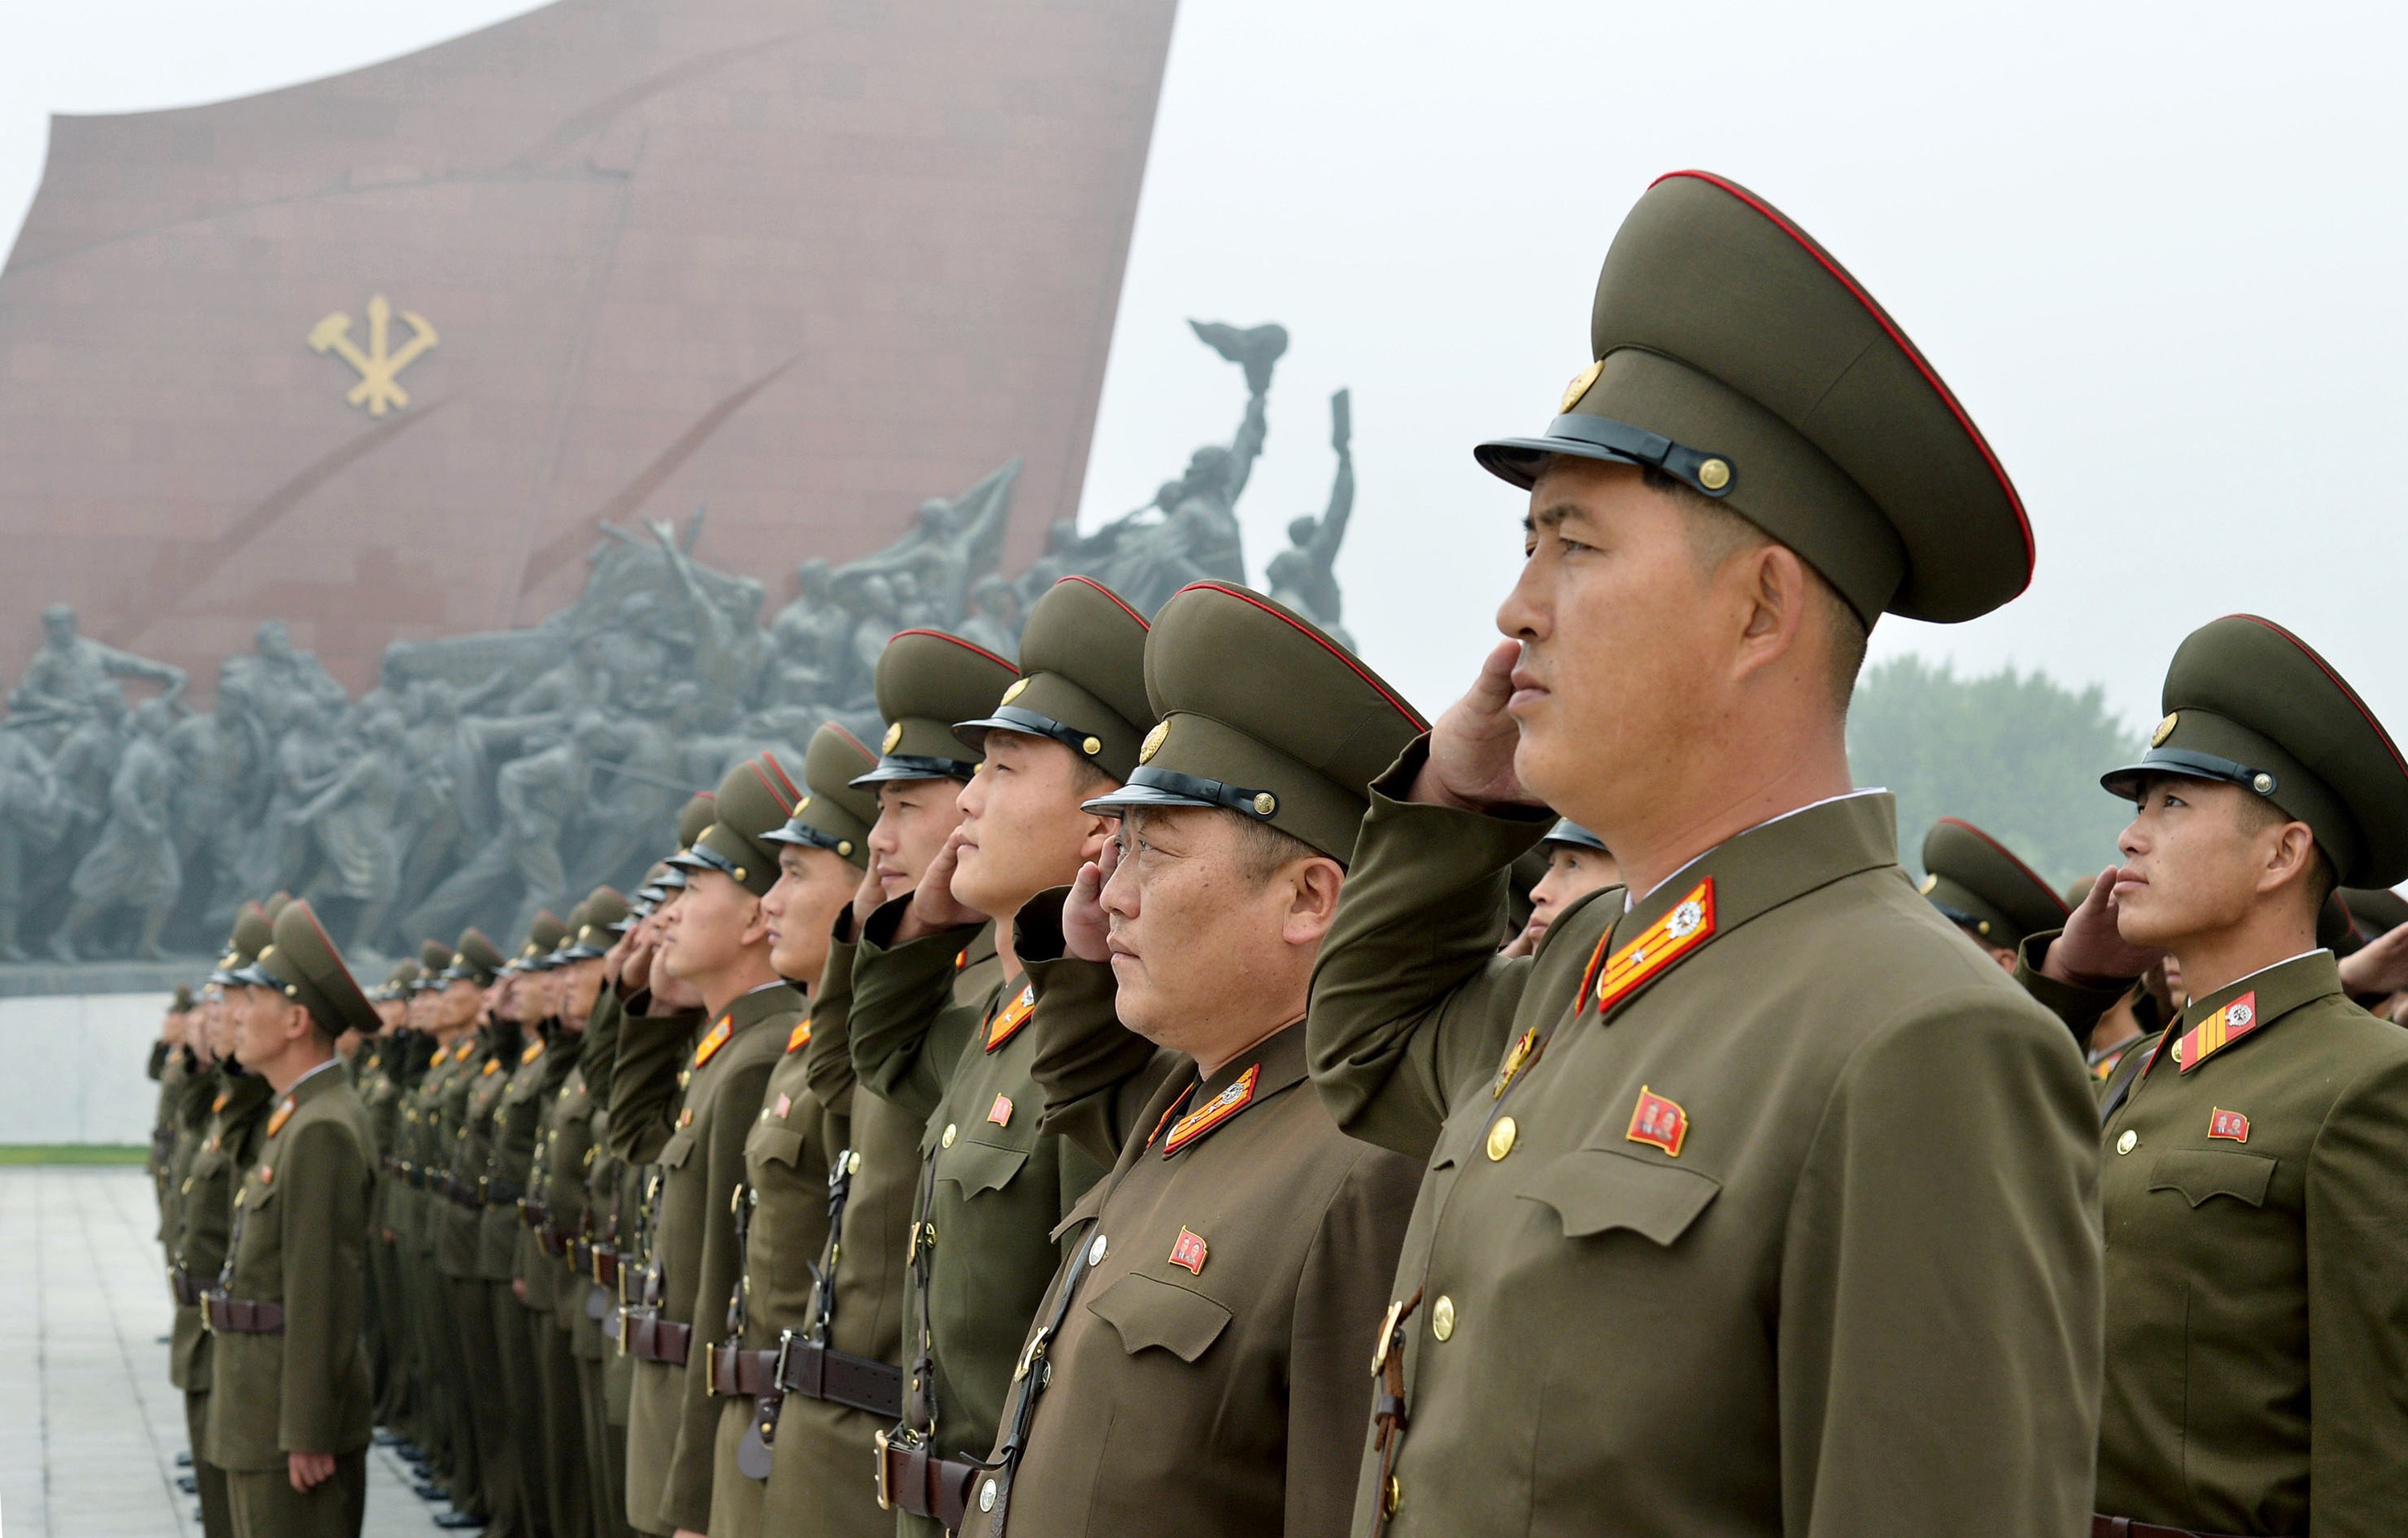 North Korean soldiers salute at Munsu Hill in Pyongyang on Saturday to mark the 69th anniversary of the country's founding. Photo: Kyodo News via AP